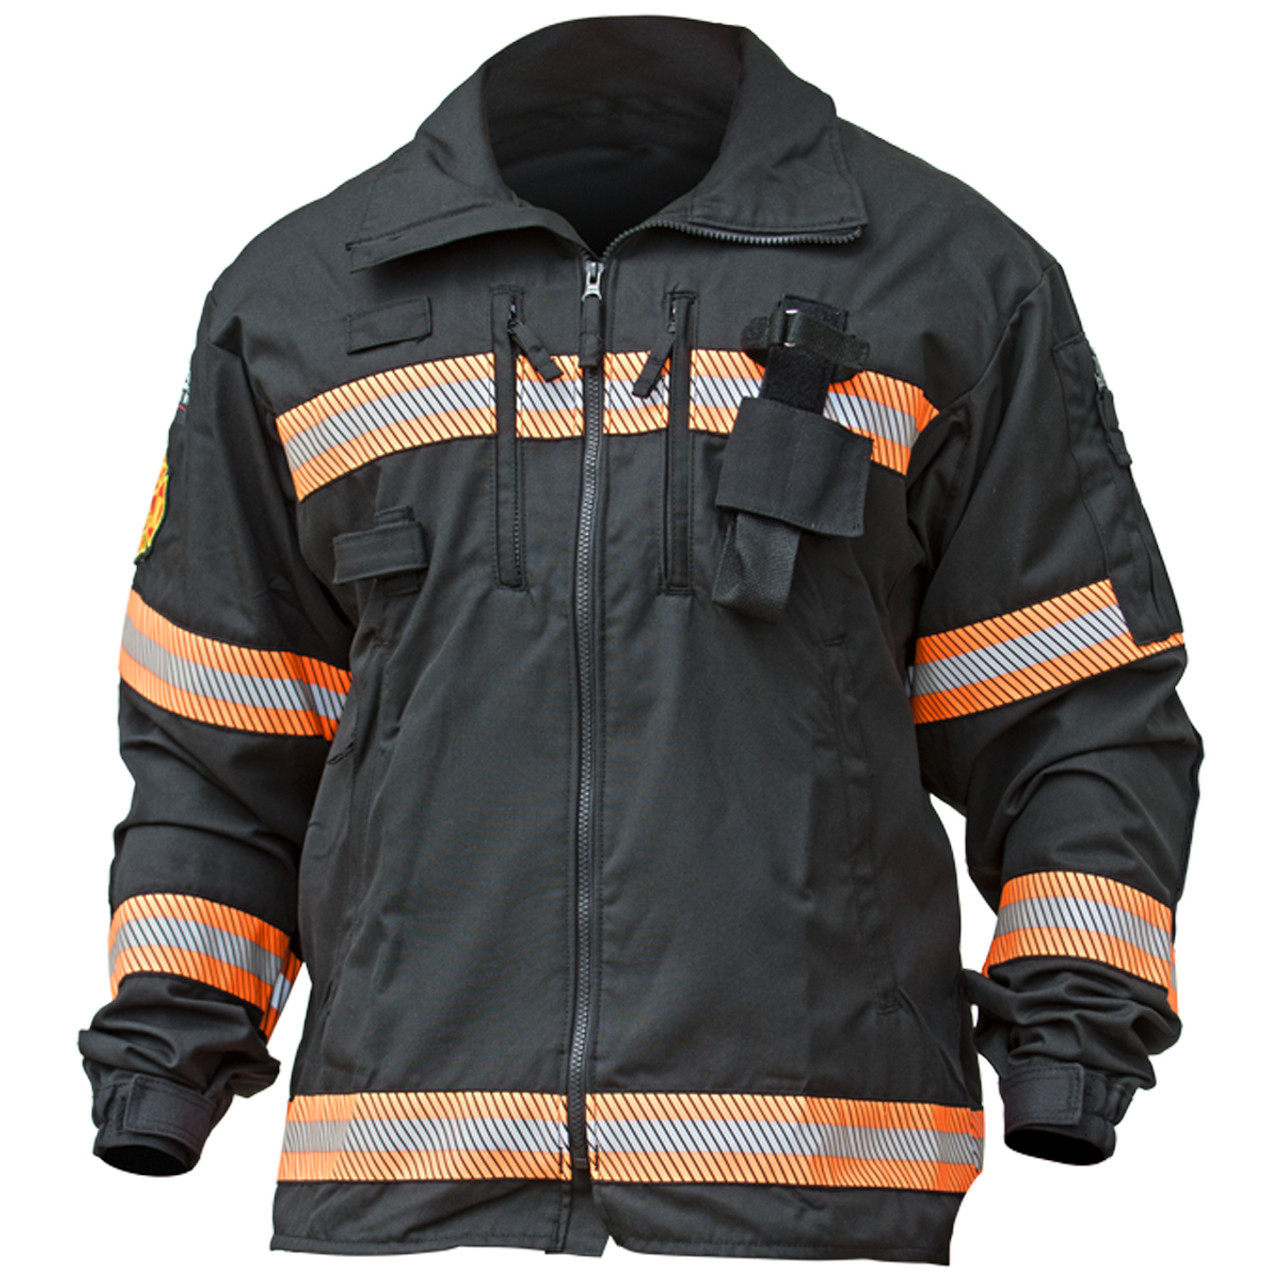 PGI FireLine Multi Mission Tactical Jacket - Curtis - Tools for Heroes